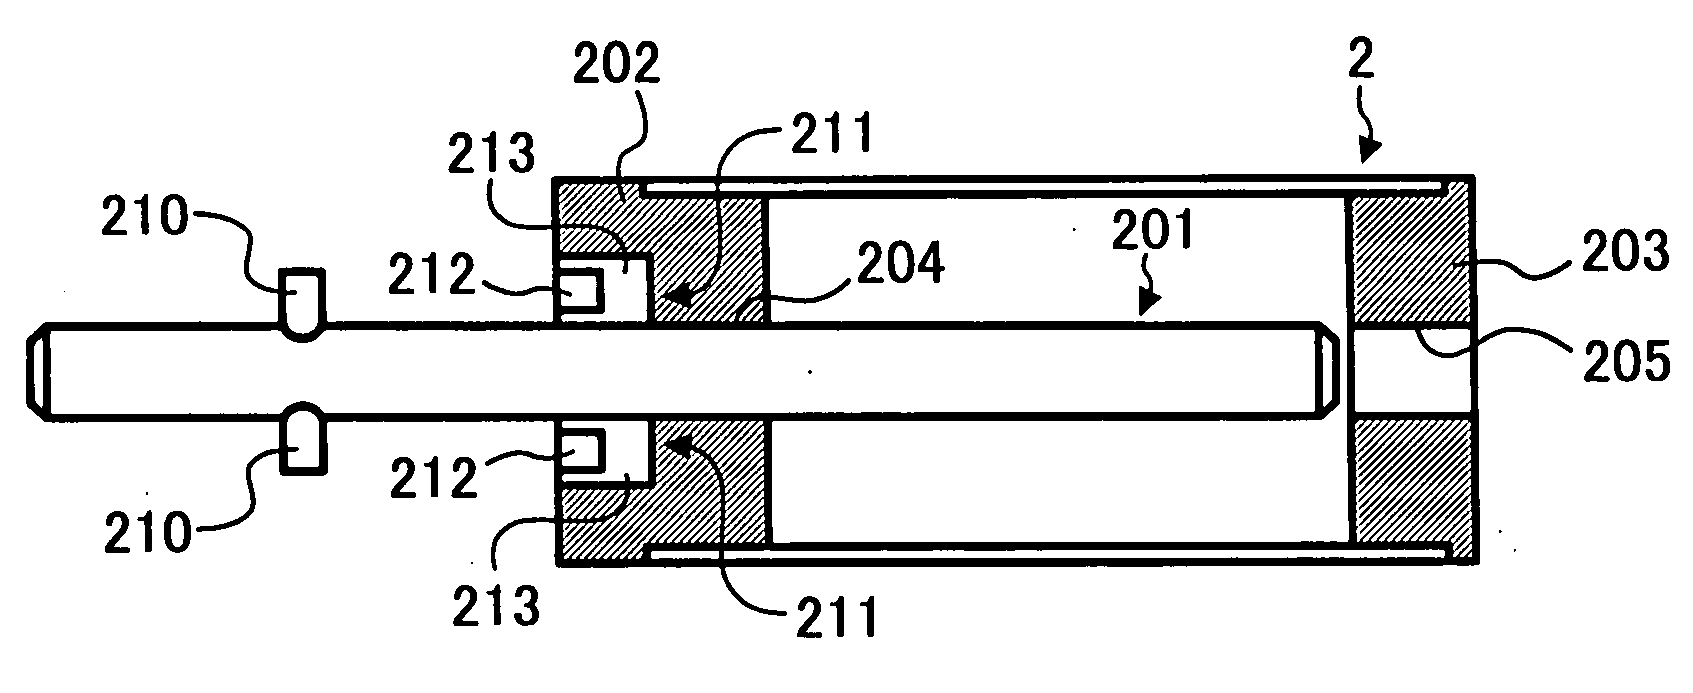 Image forming apparatus having a detachable cartridge including a photoconductive drum with axis shaft having a minimal rotational eccentricity, and a method of assembling the image forming apparatus